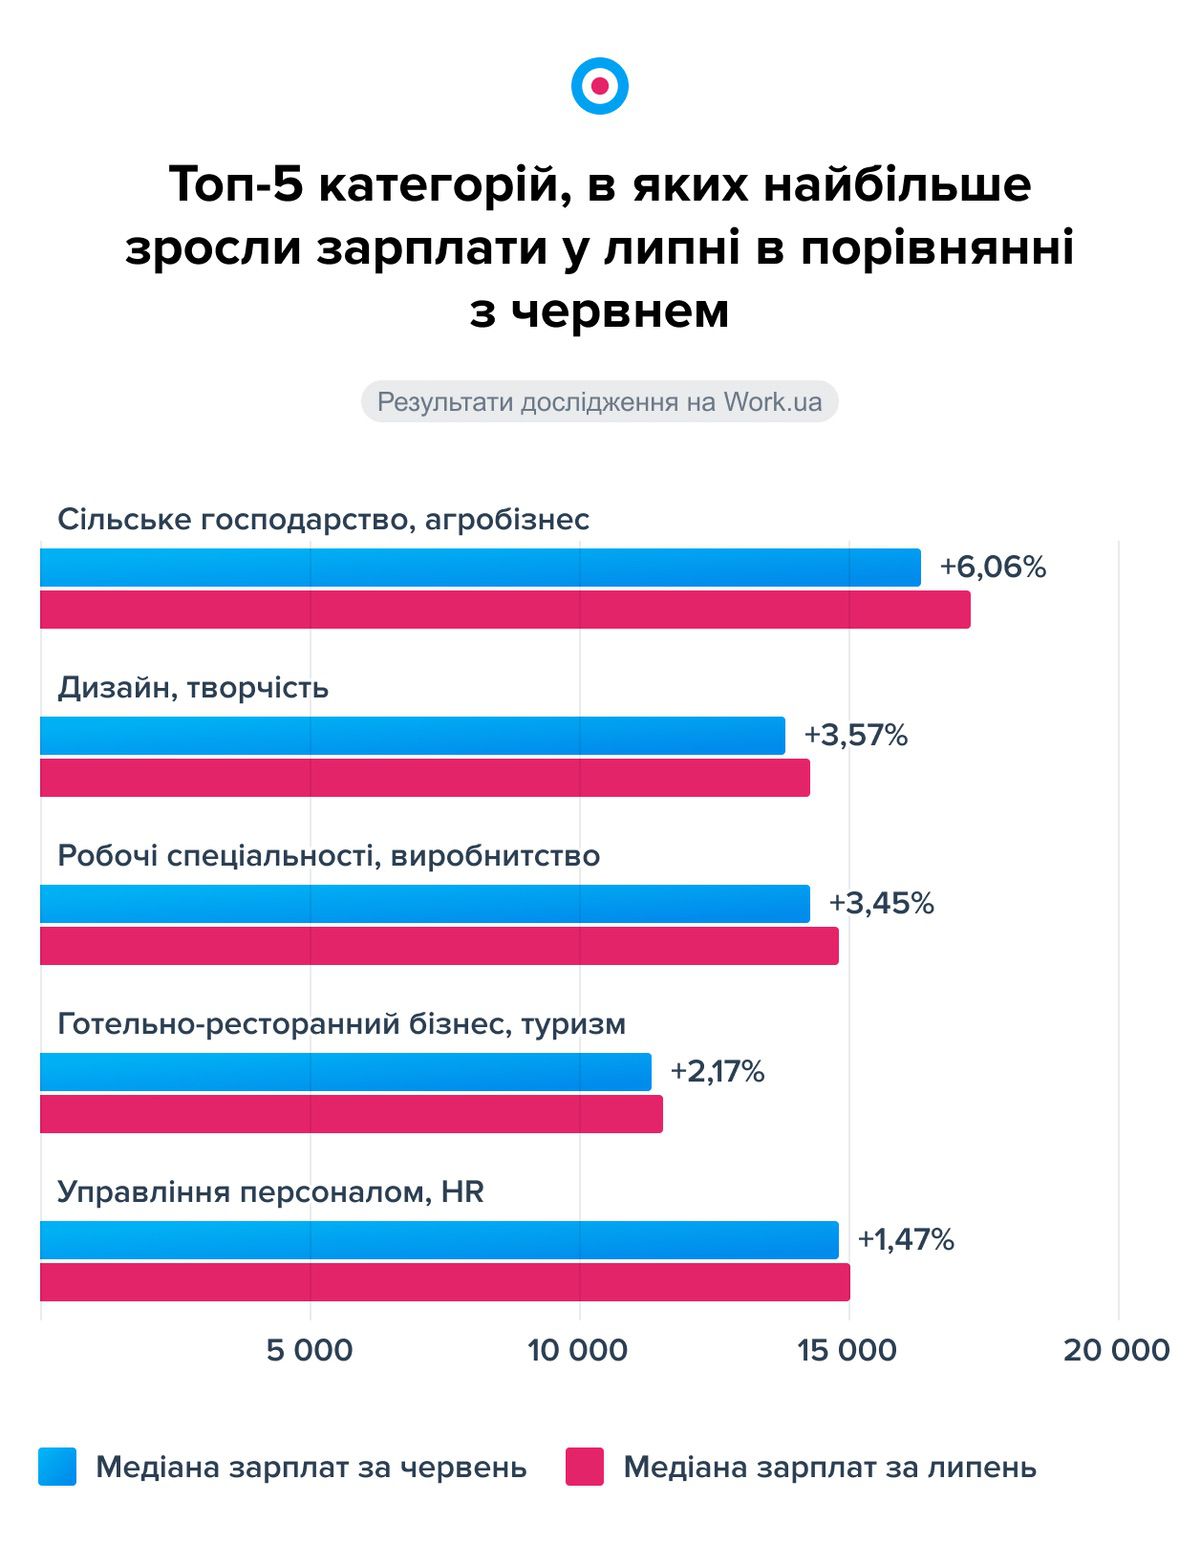 Not only IT: according to Work.ua, the labor market grew by 14% in July